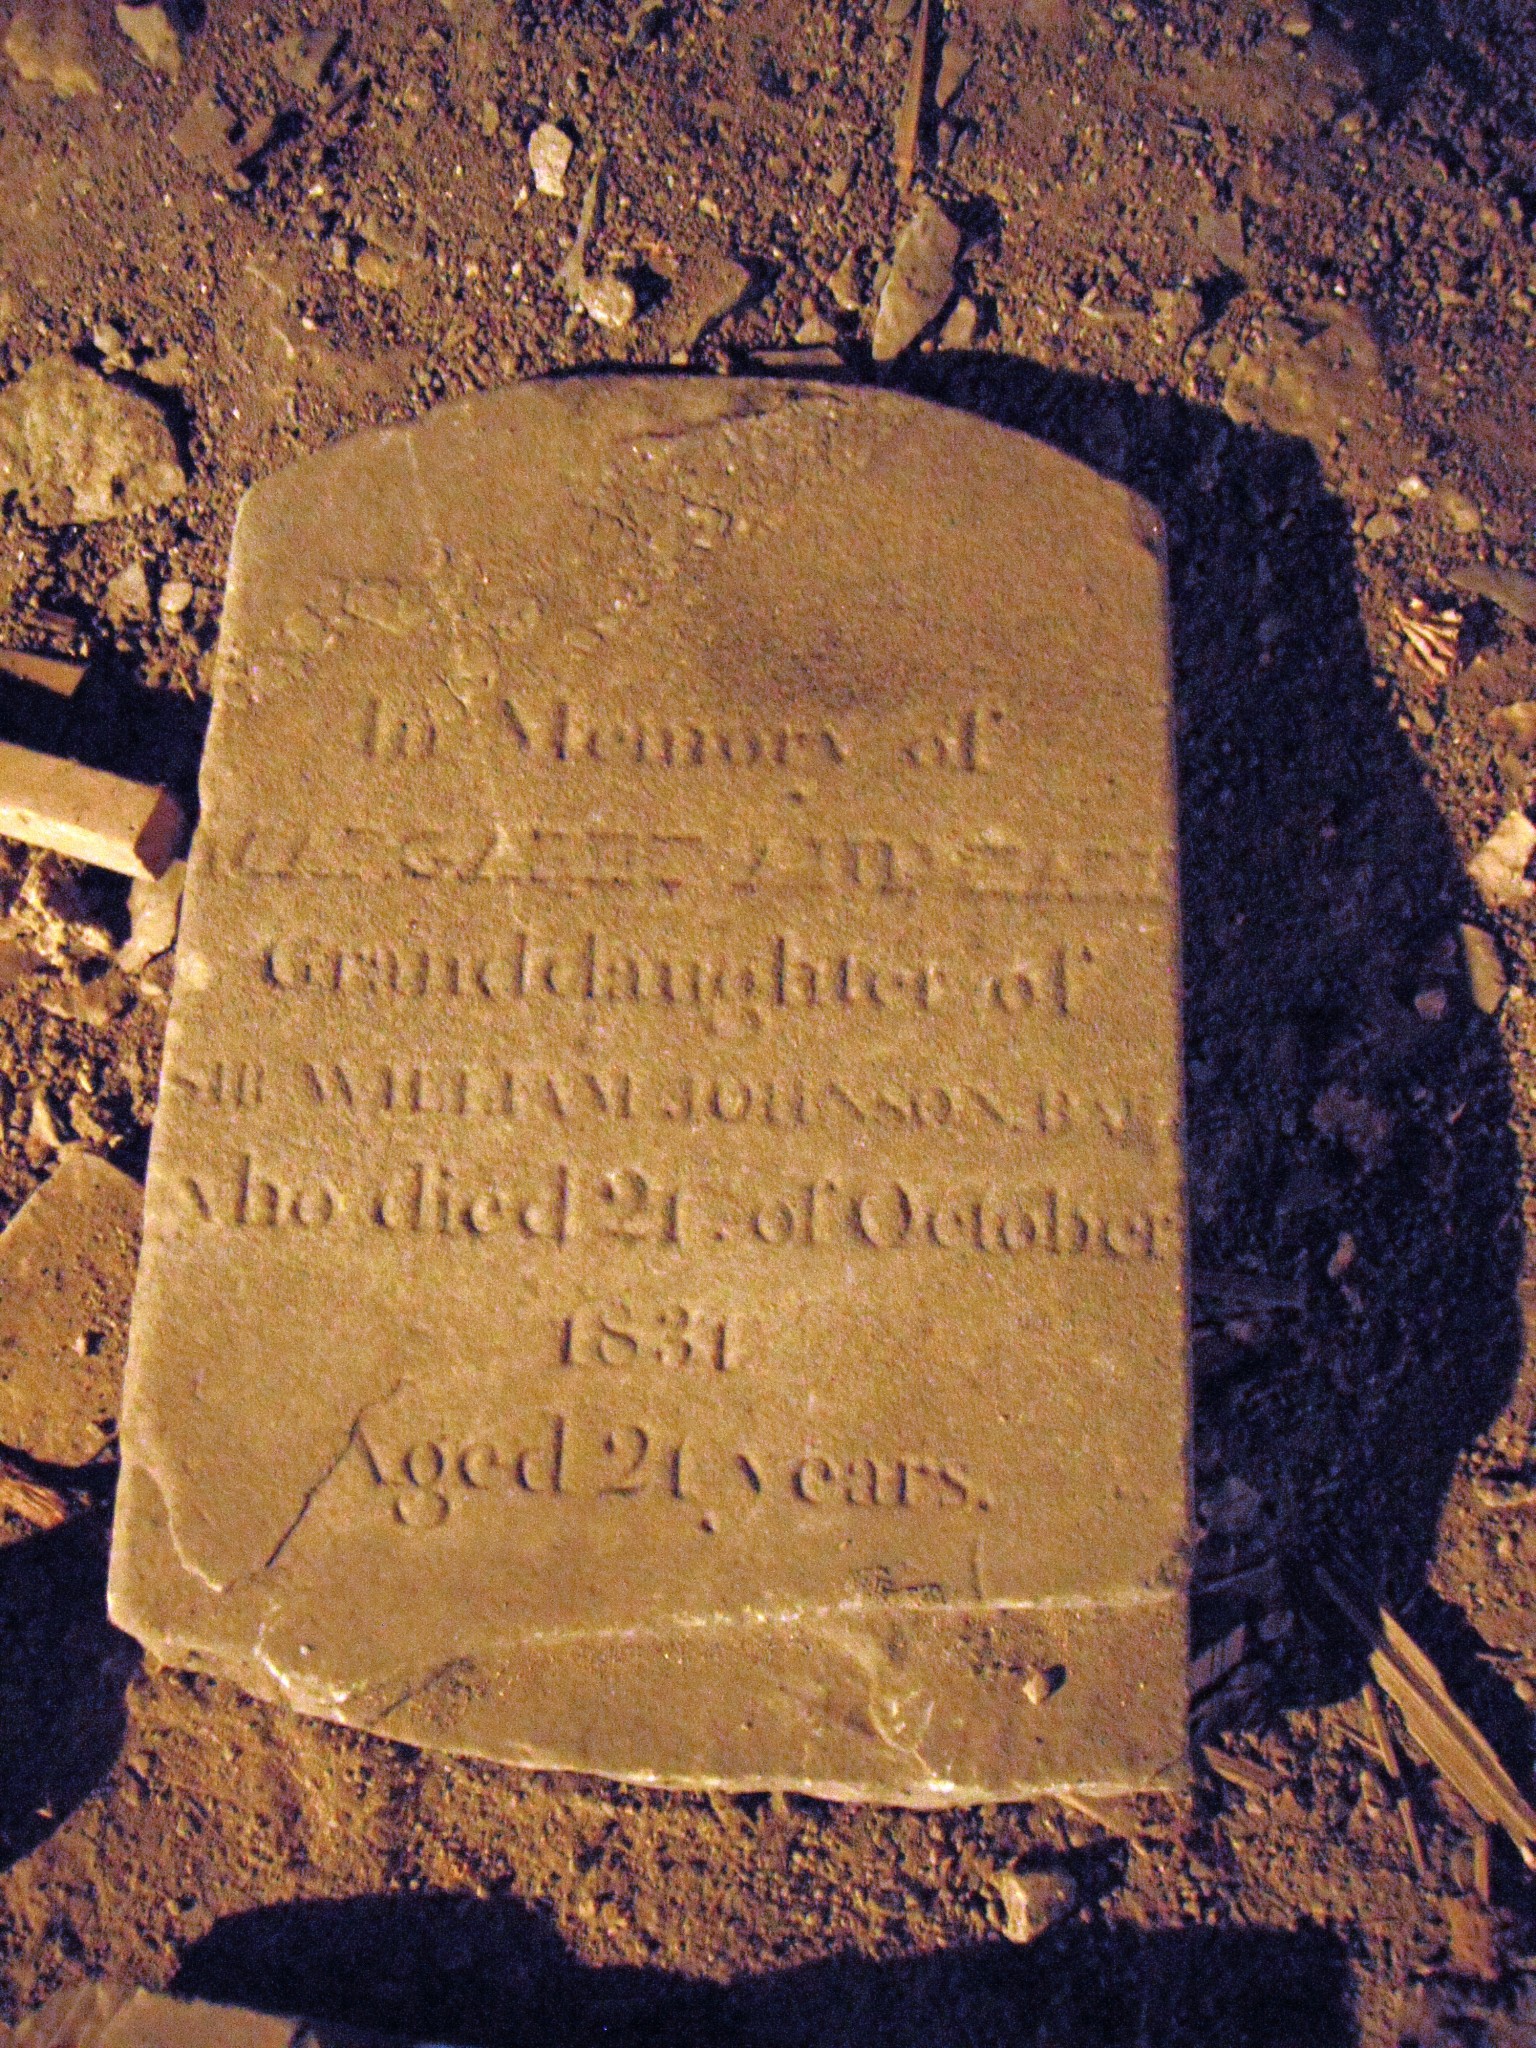 Marker for Margaret Earl, granddaughter of William Johnson and Molly Brant, under the church hall (Credit Mary Davis Little)